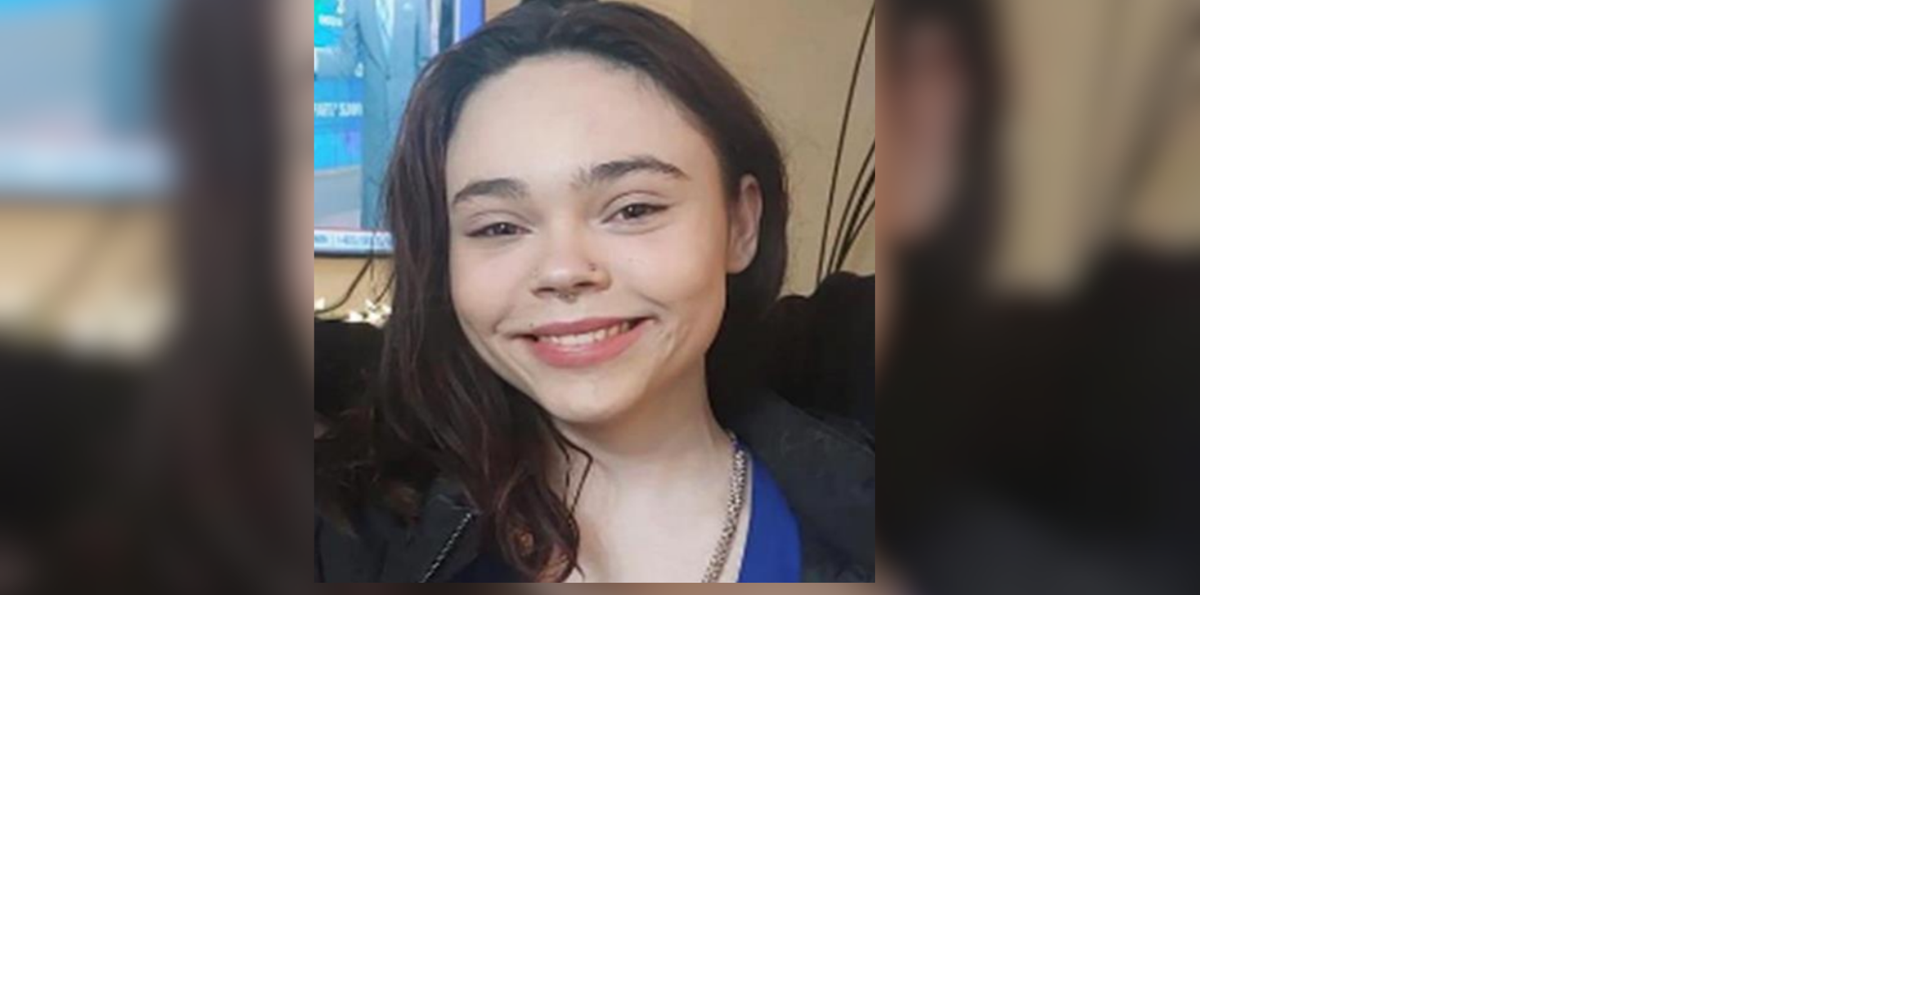 Washington State Patrol searching for missing 16-year-old girl